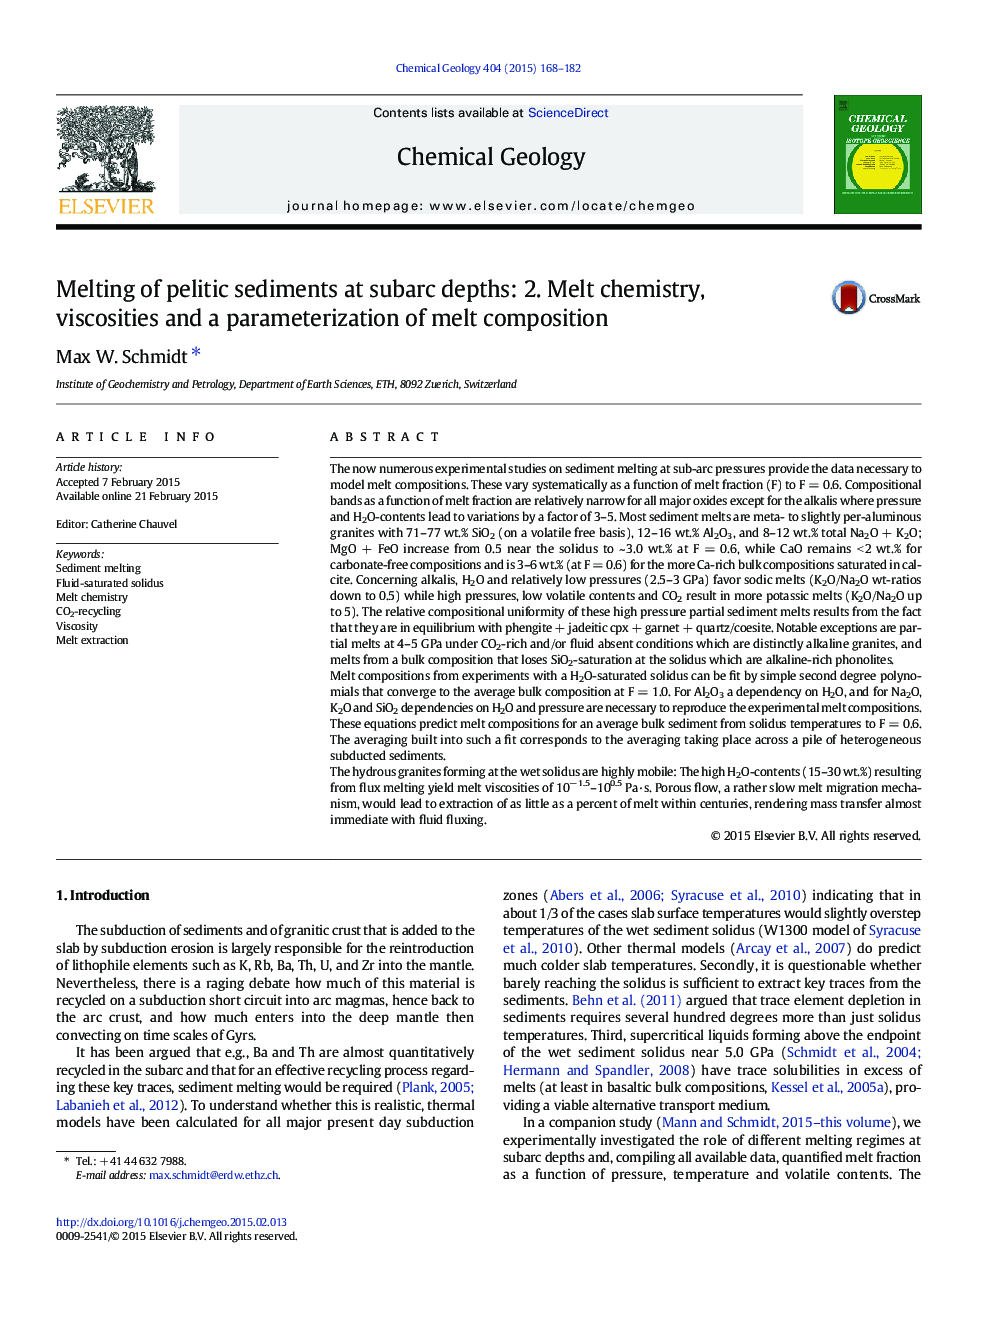 Melting of pelitic sediments at subarc depths: 2. Melt chemistry, viscosities and a parameterization of melt composition